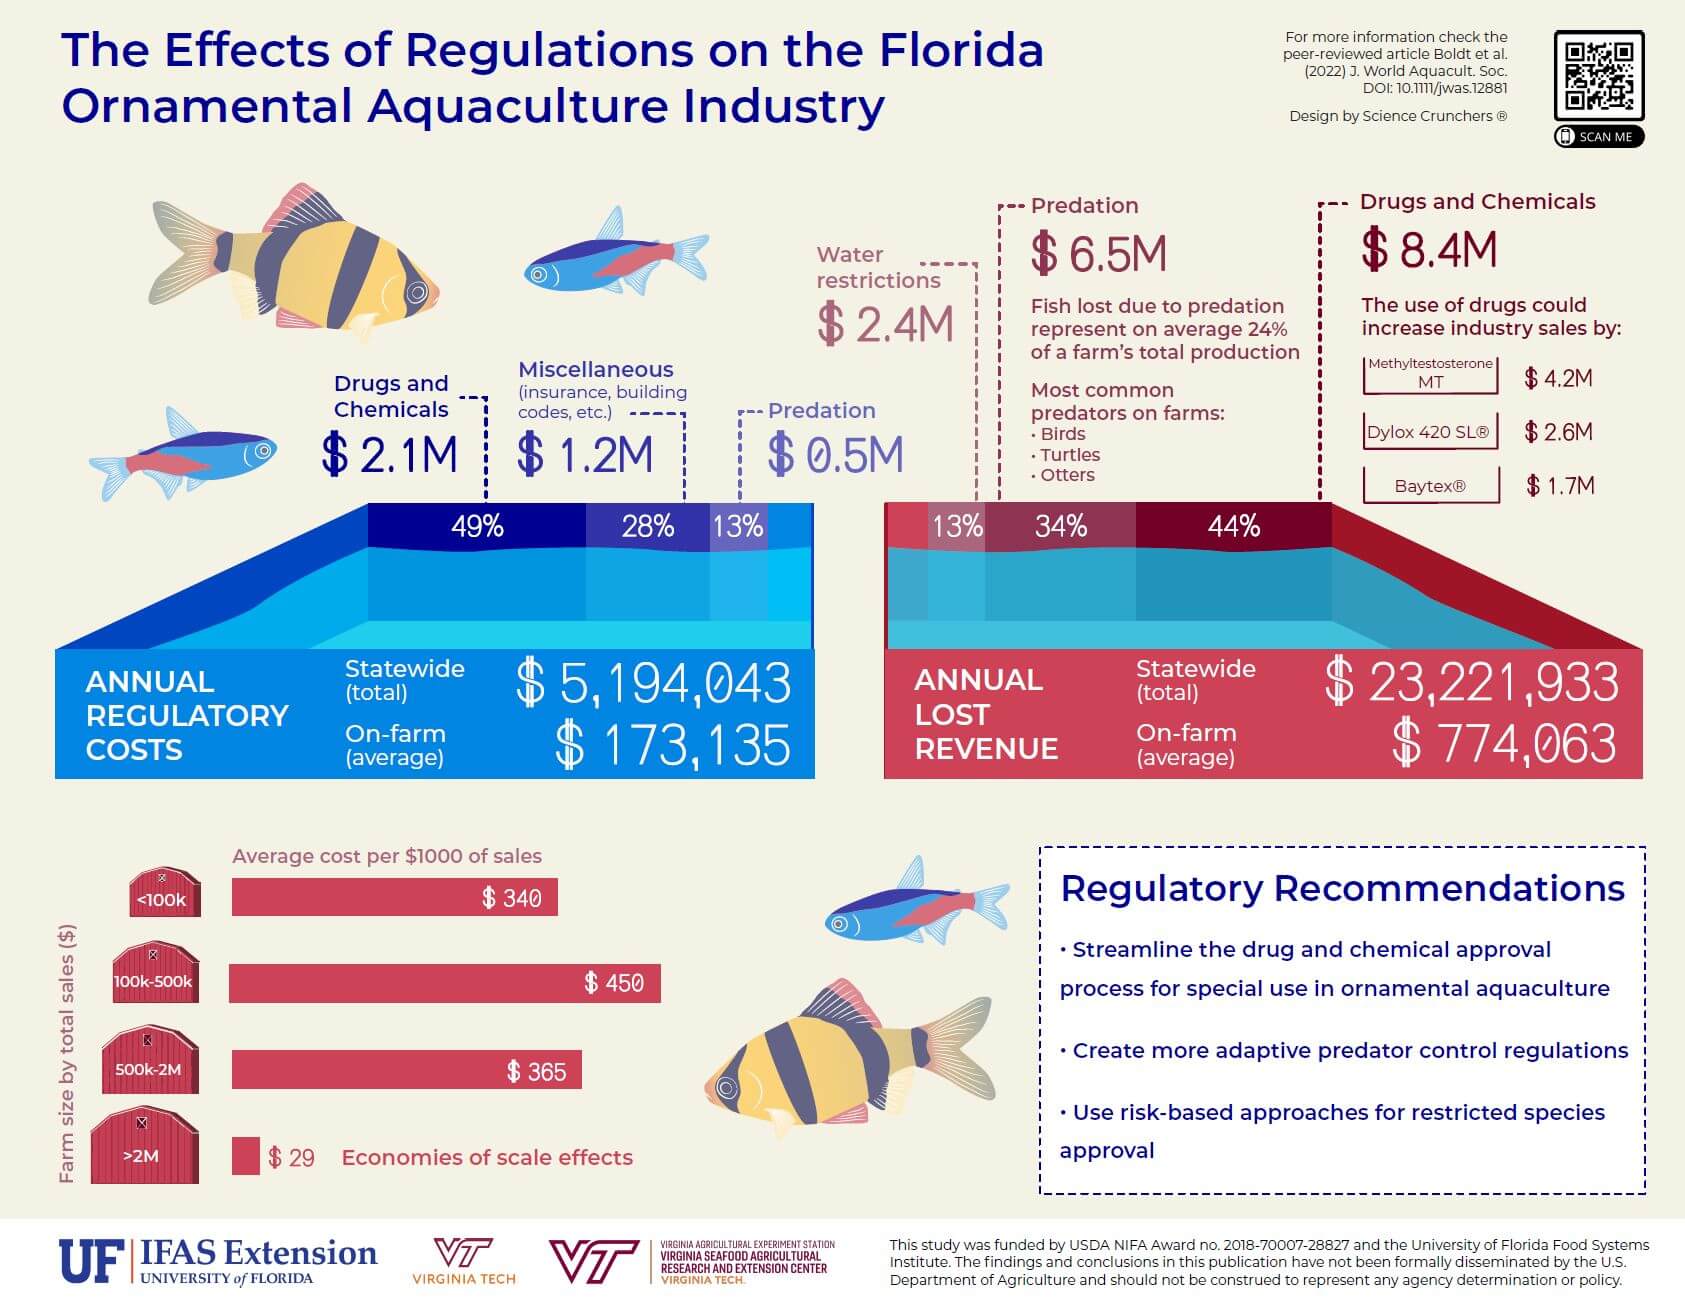 Effects of regulations on the Florida Ornamental Aquaculture industry